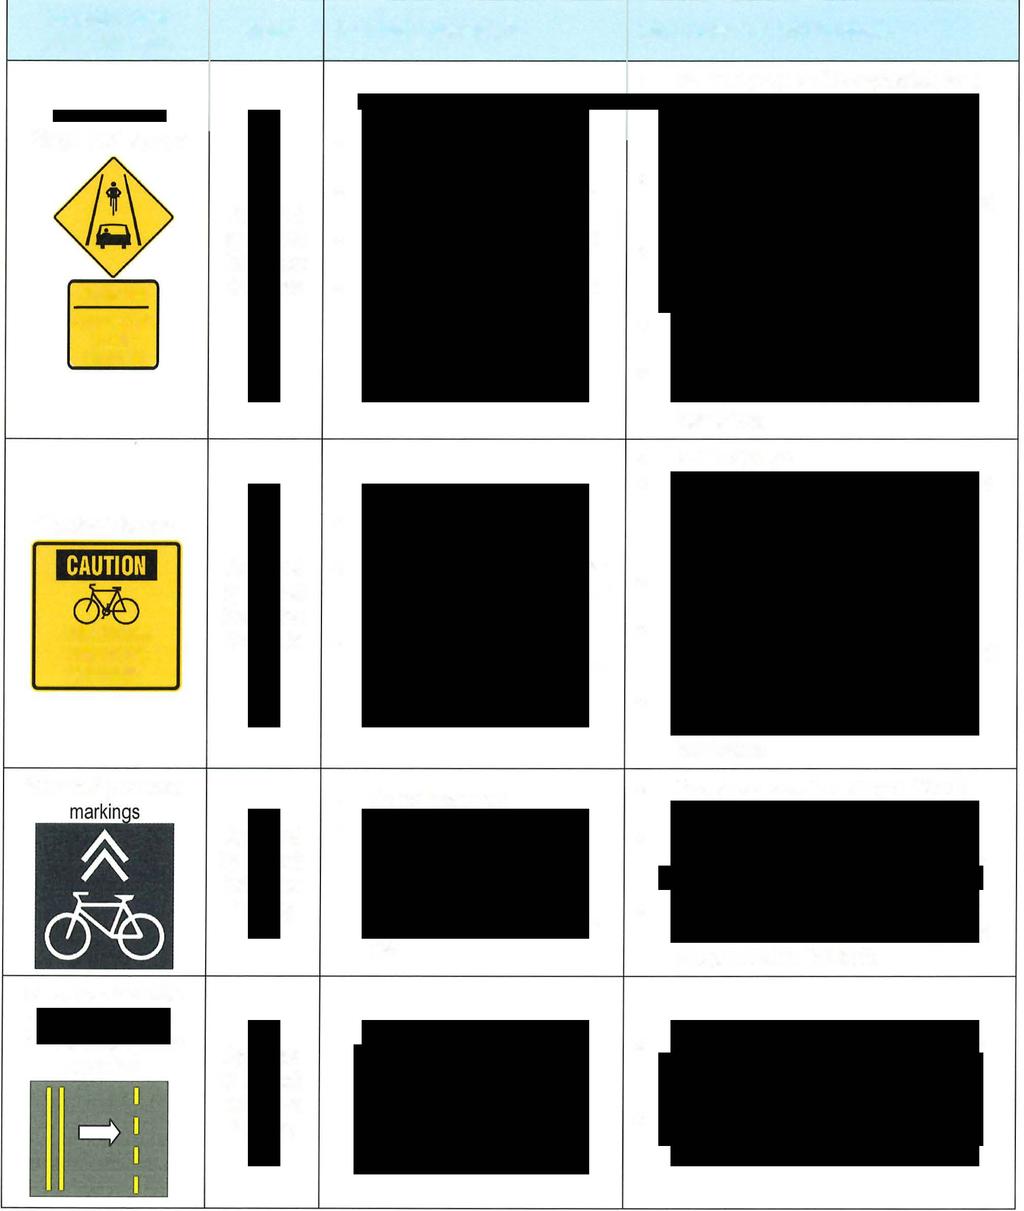 . Attachment 1 Assessment of Potential Road Safety Measures to be Implemented Prior to Fall 2018 Potential Road Safety Measure Status Resident Comments(1) Staff Comments and Rationale Retain signage